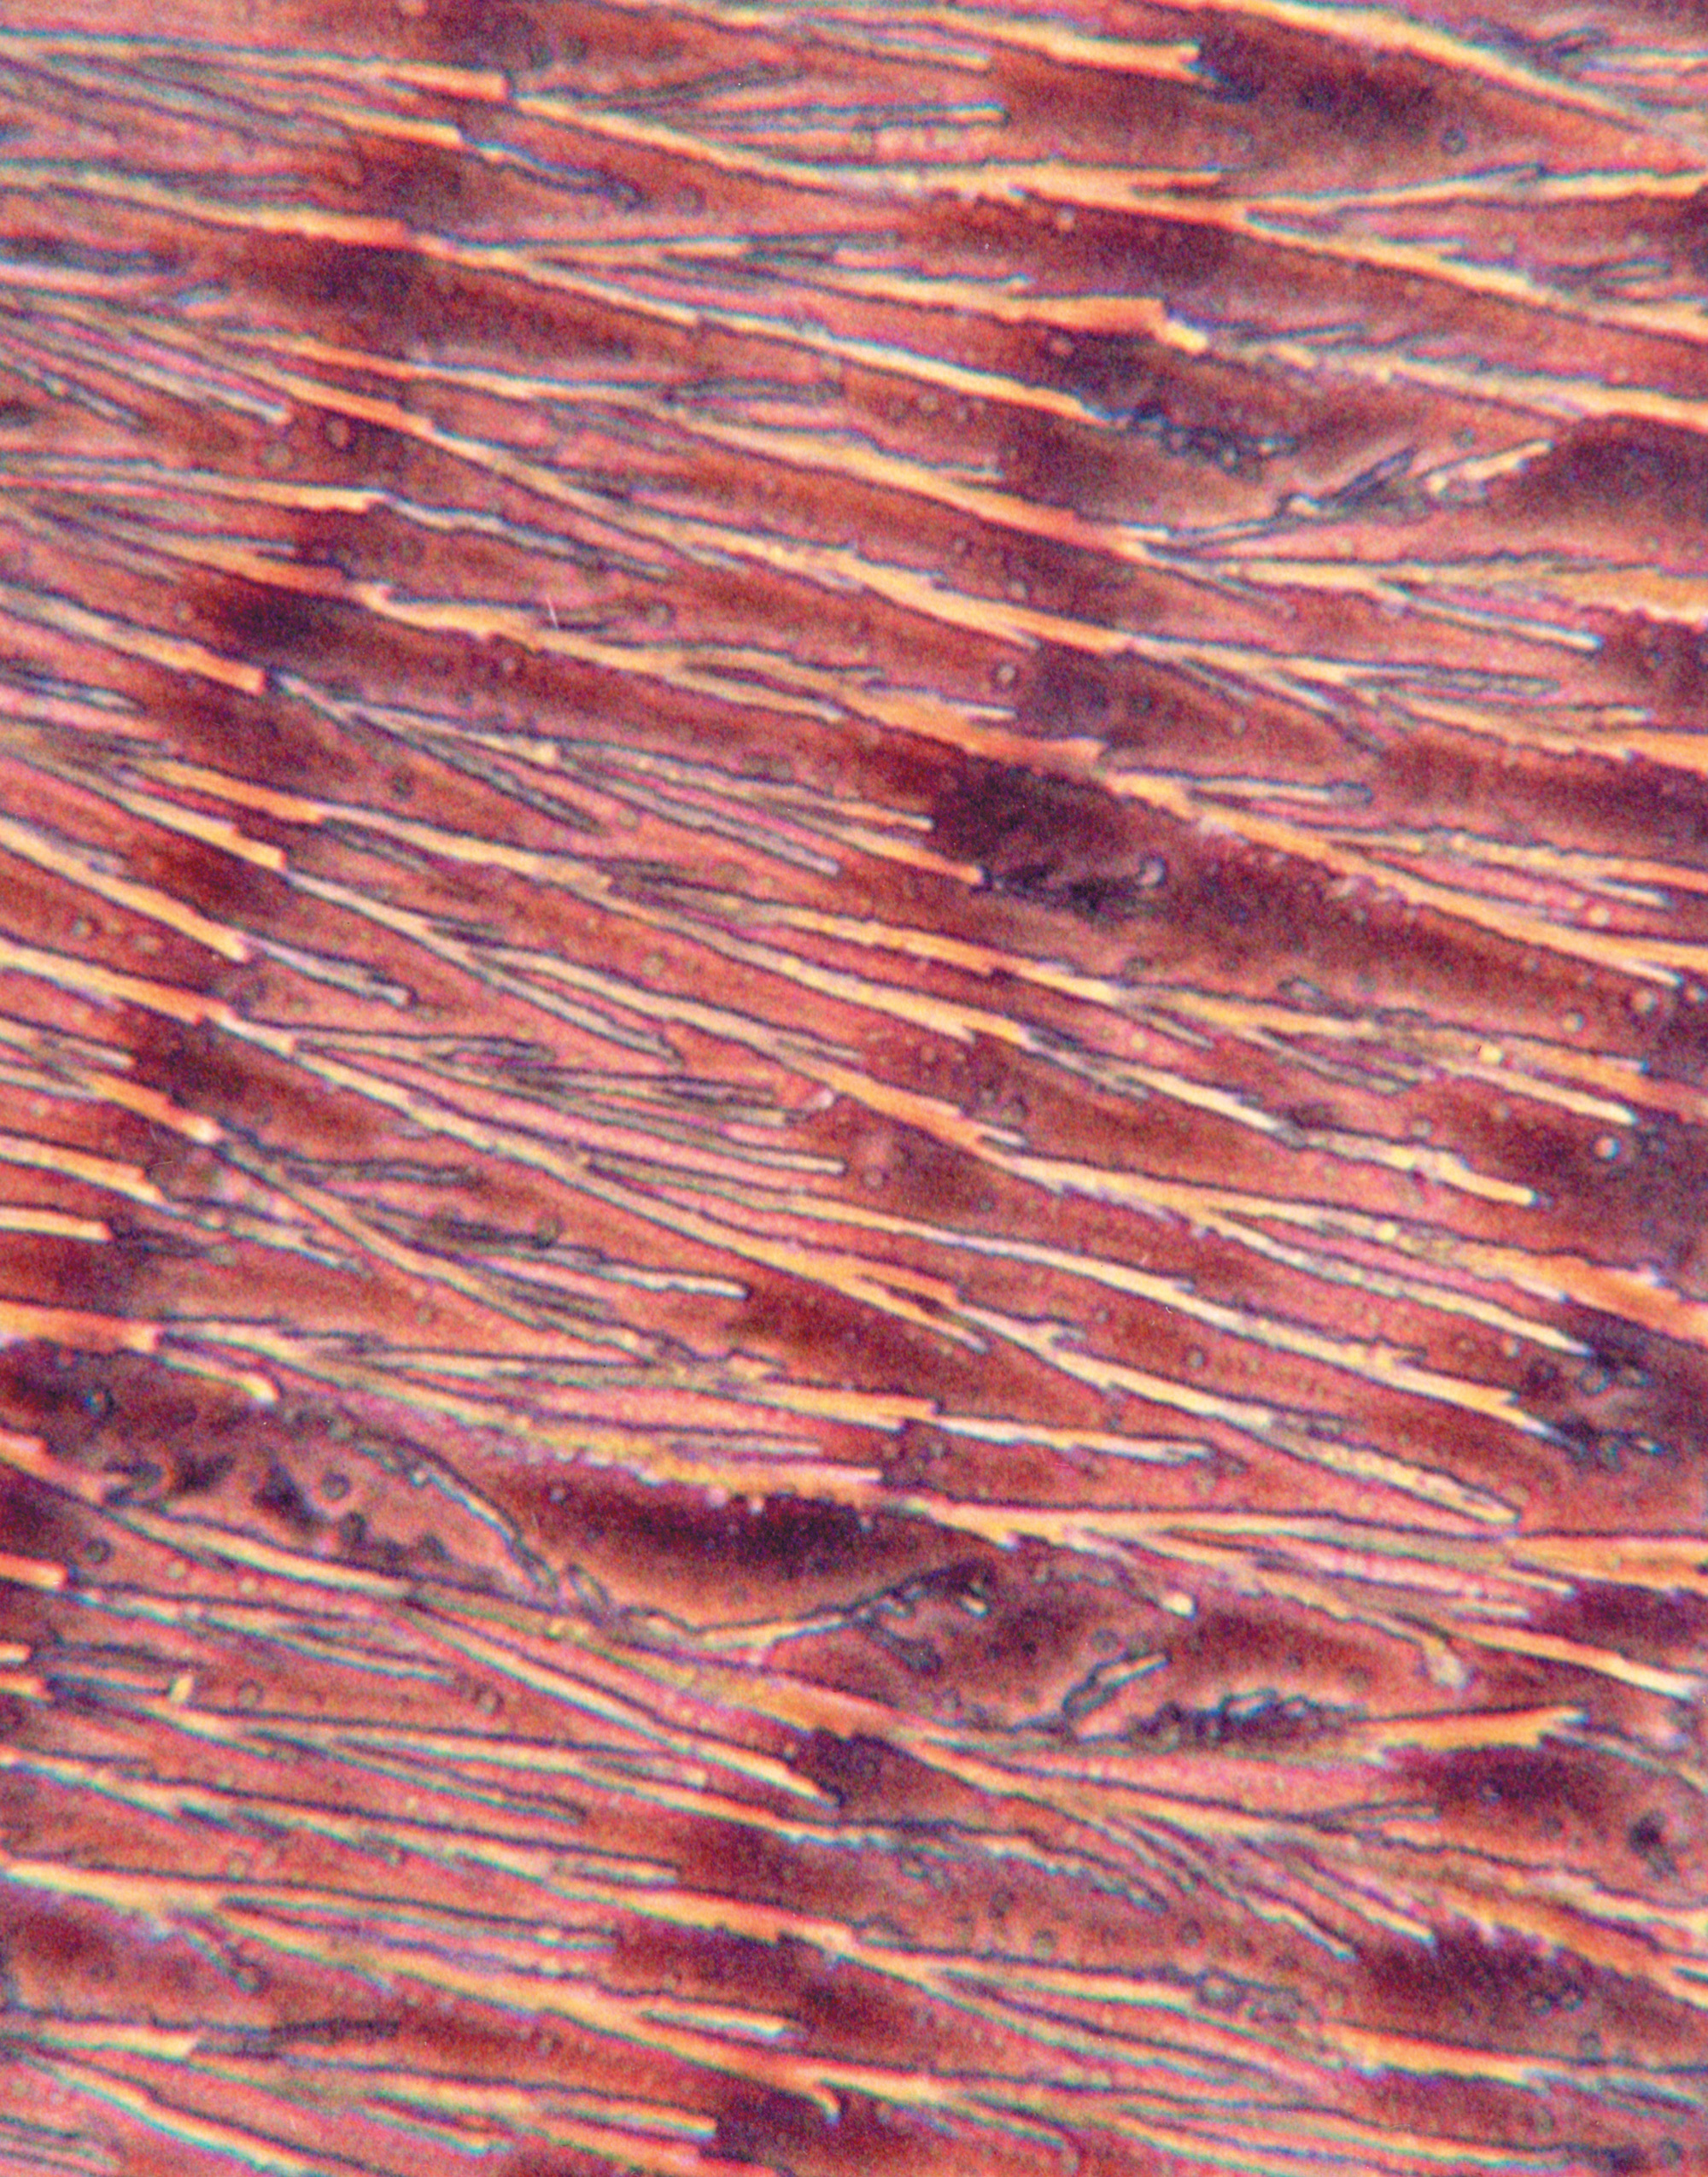 Another microphotograph of prothrombin dried on a glass slide, but in this experiment the linear structure of transmission cables is formed by coating the prothrombin with the biological dialectric hyaluronic acid. The discovery of the electro-active nature of prothrombin and other bio-polymers such as DNA suggests the possibility of a corallary genetic code and a “vascular internet.”